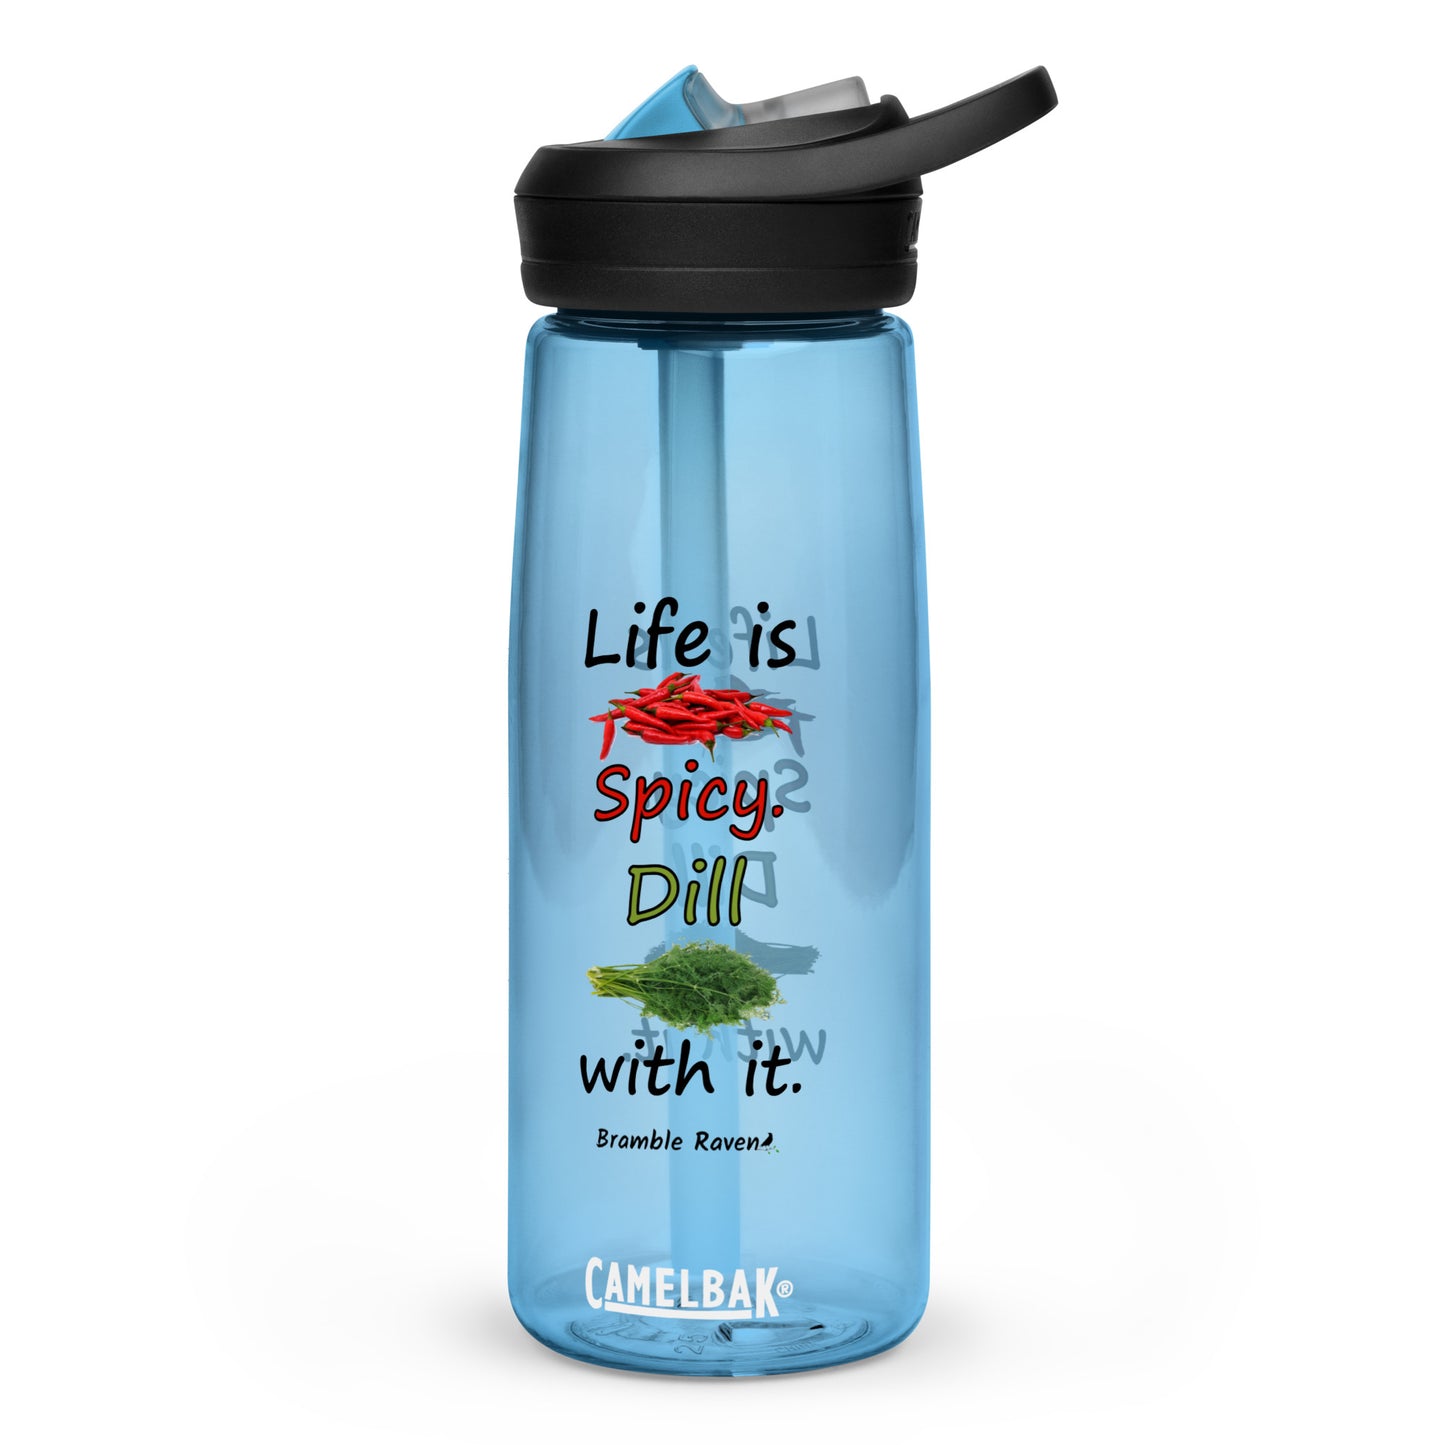 25 ounce sports water bottle with spill-proof lid and bite valve. Light blue stain and odor-resistant BPA-free plastic. Features double-sided design of "Life is spicy. Dill with it" phrase with peppers and dill weed images.